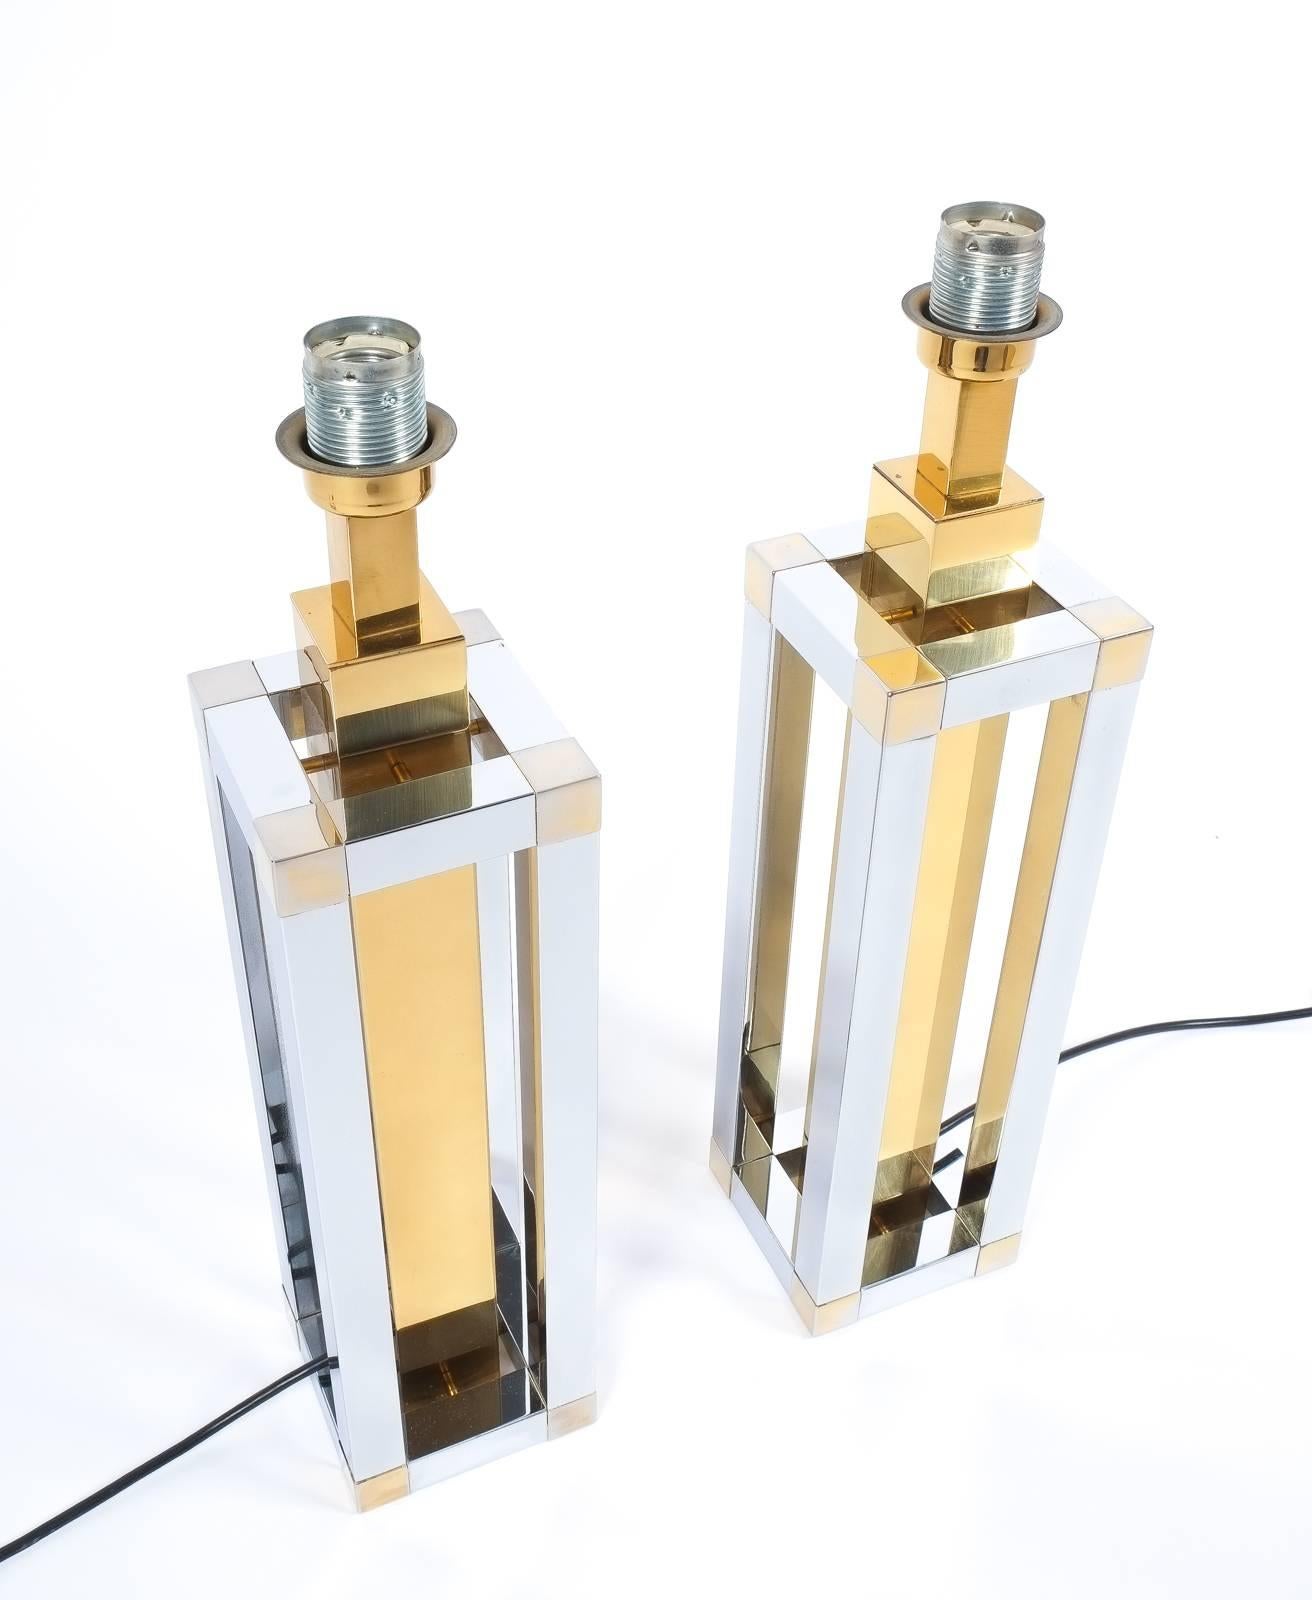 Polished Romeo Rega Chrome and Brass Table Lamps, Italy circa 1970 For Sale